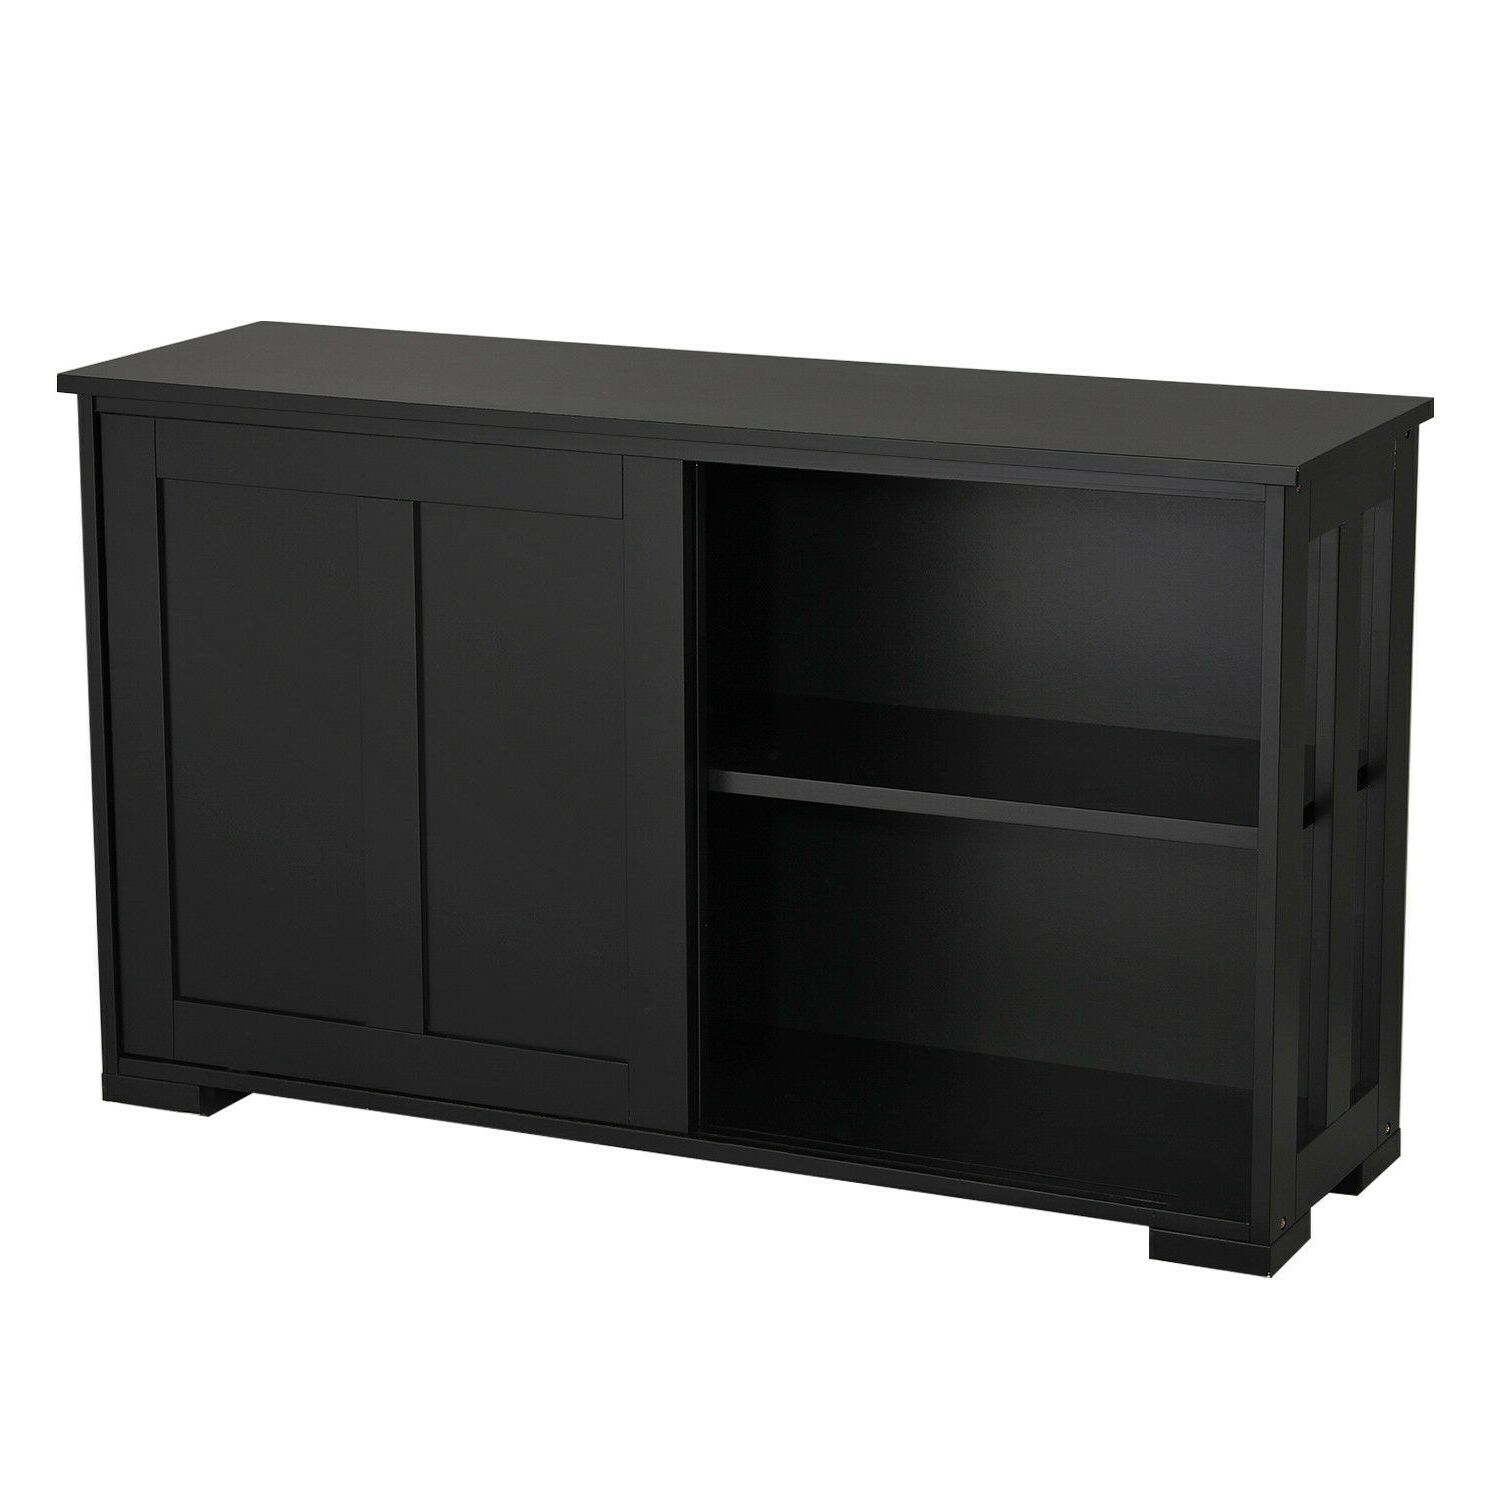 Kitchen Storage Cabinet Buffet Server Table Sideboard Dining Room Wood Black Throughout Black Hutch Buffets With Stainless Top (View 10 of 20)